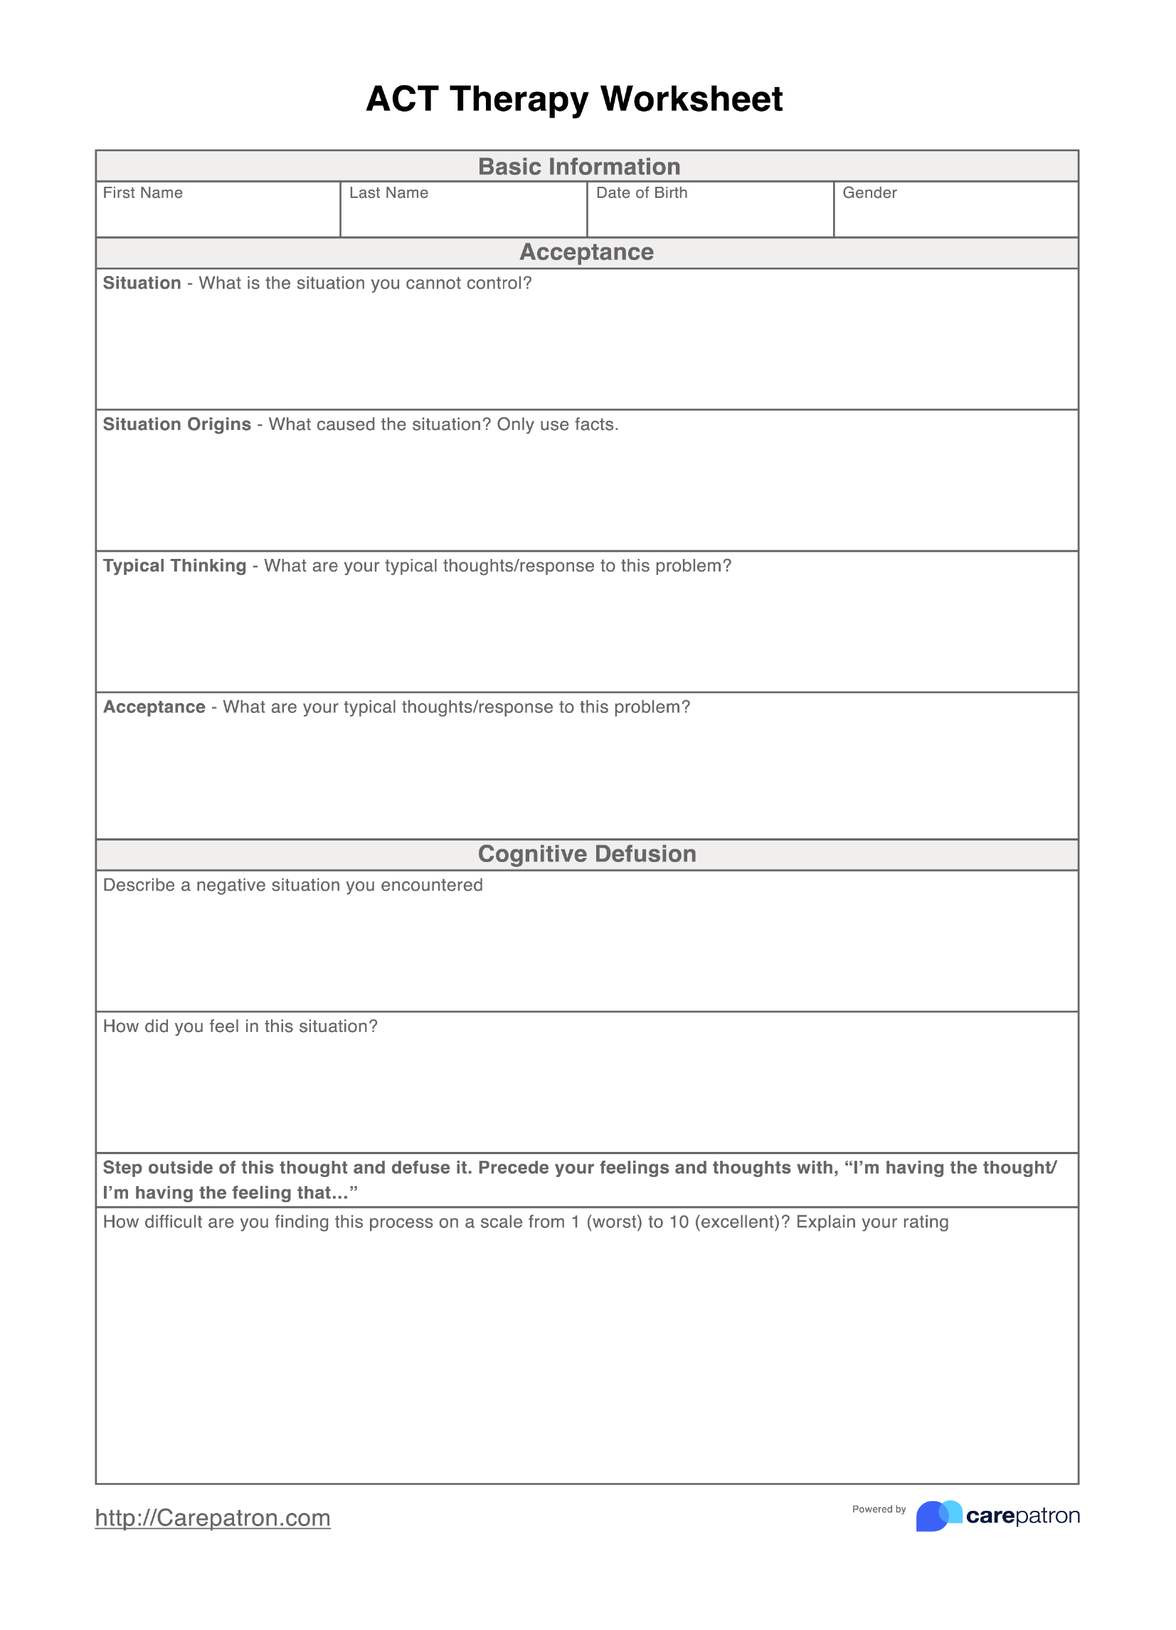 ACT Therapy Worksheet PDF Example